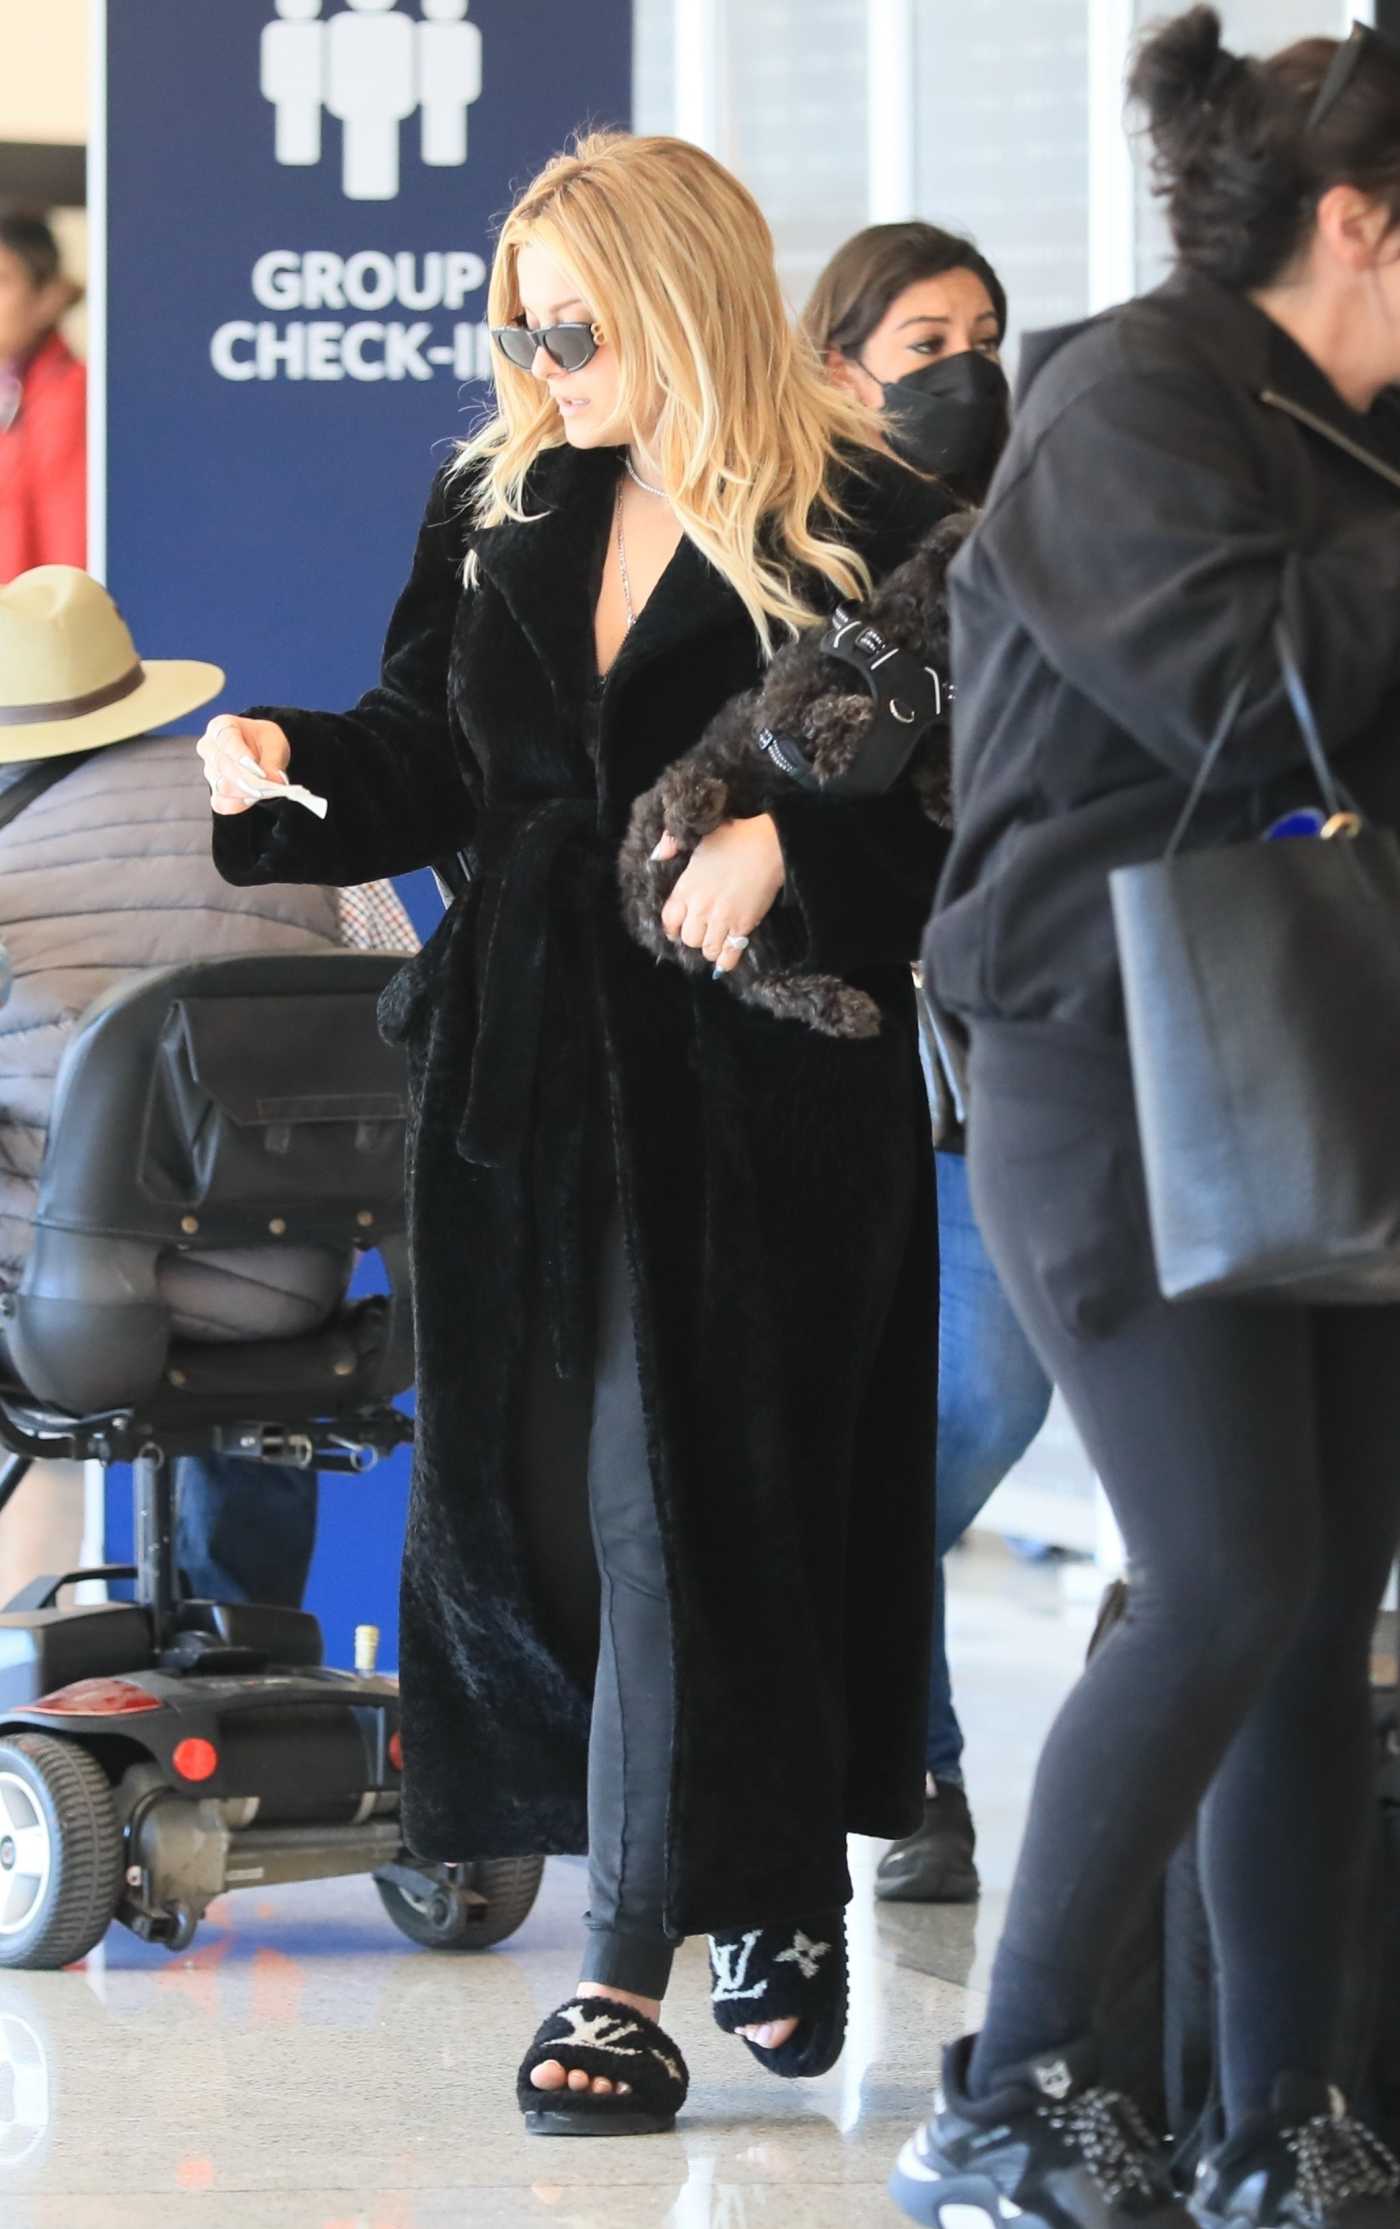 Bebe Rexha in a Black Fur Coat Arrives at LAX Airport in Los Angeles 11/22/2022